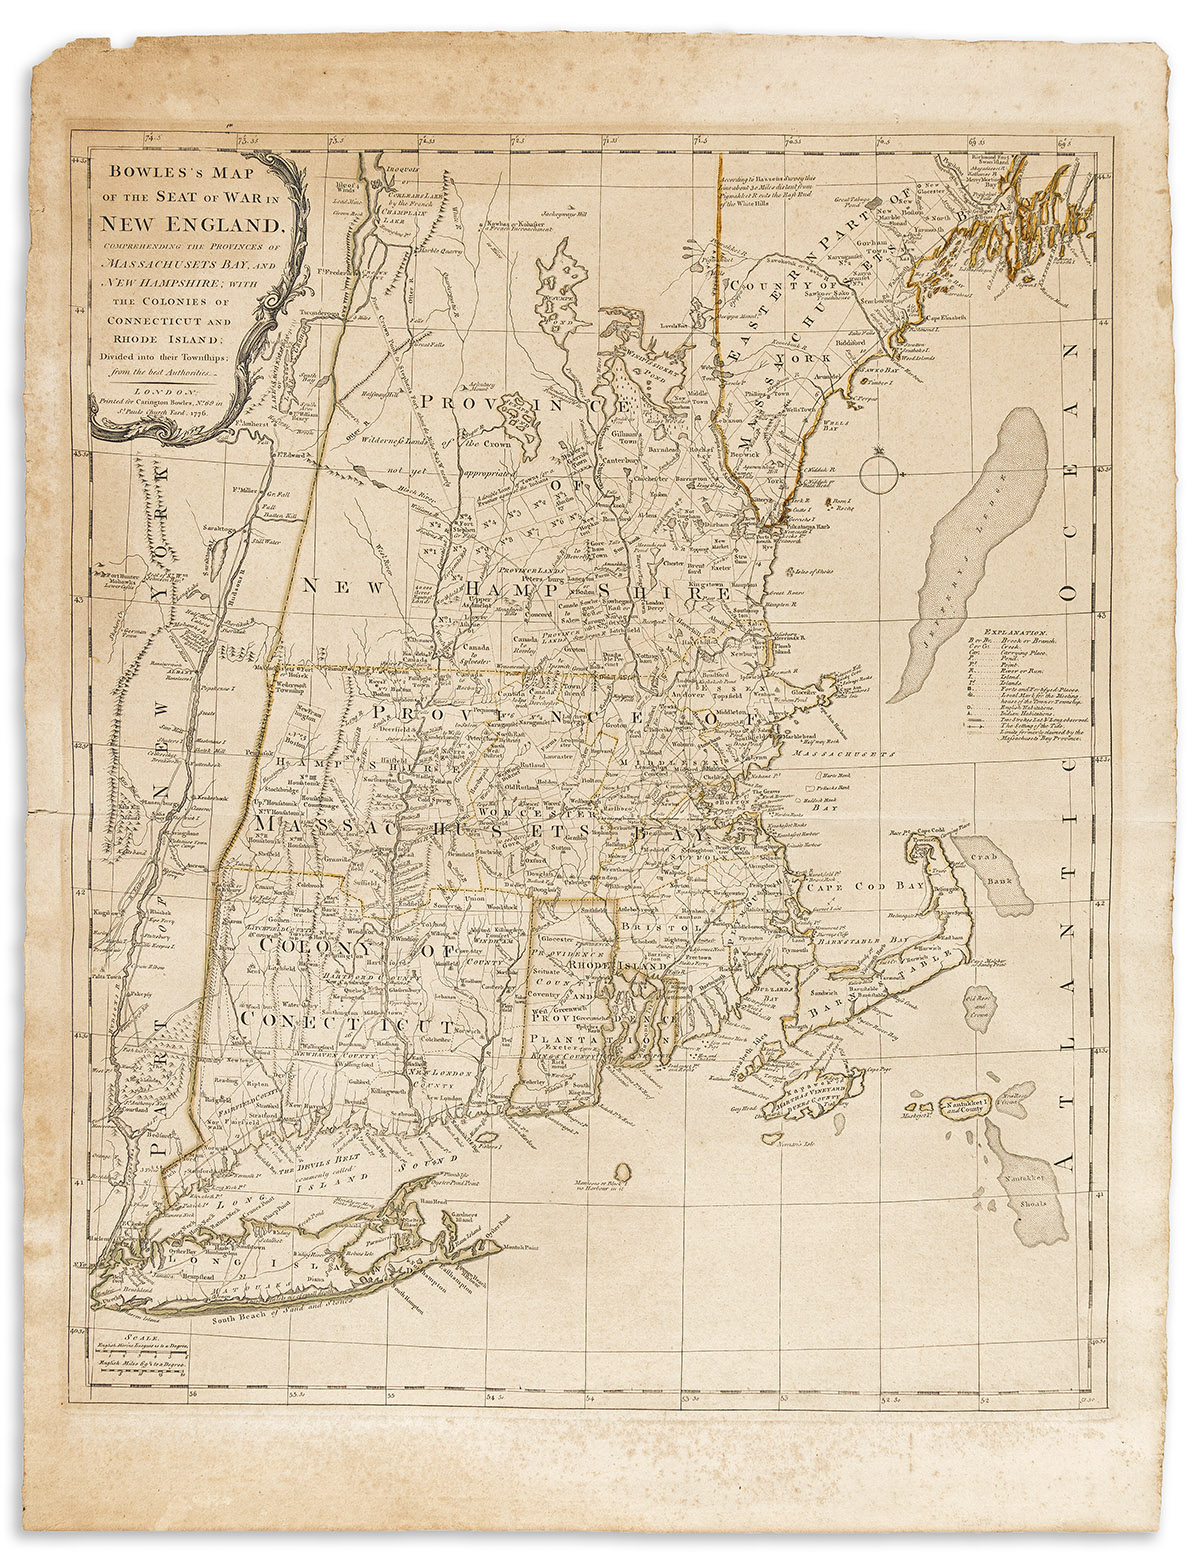 (NEW ENGLAND.) Carington Bowles. Bowles's Map of the Seat of War in New England,